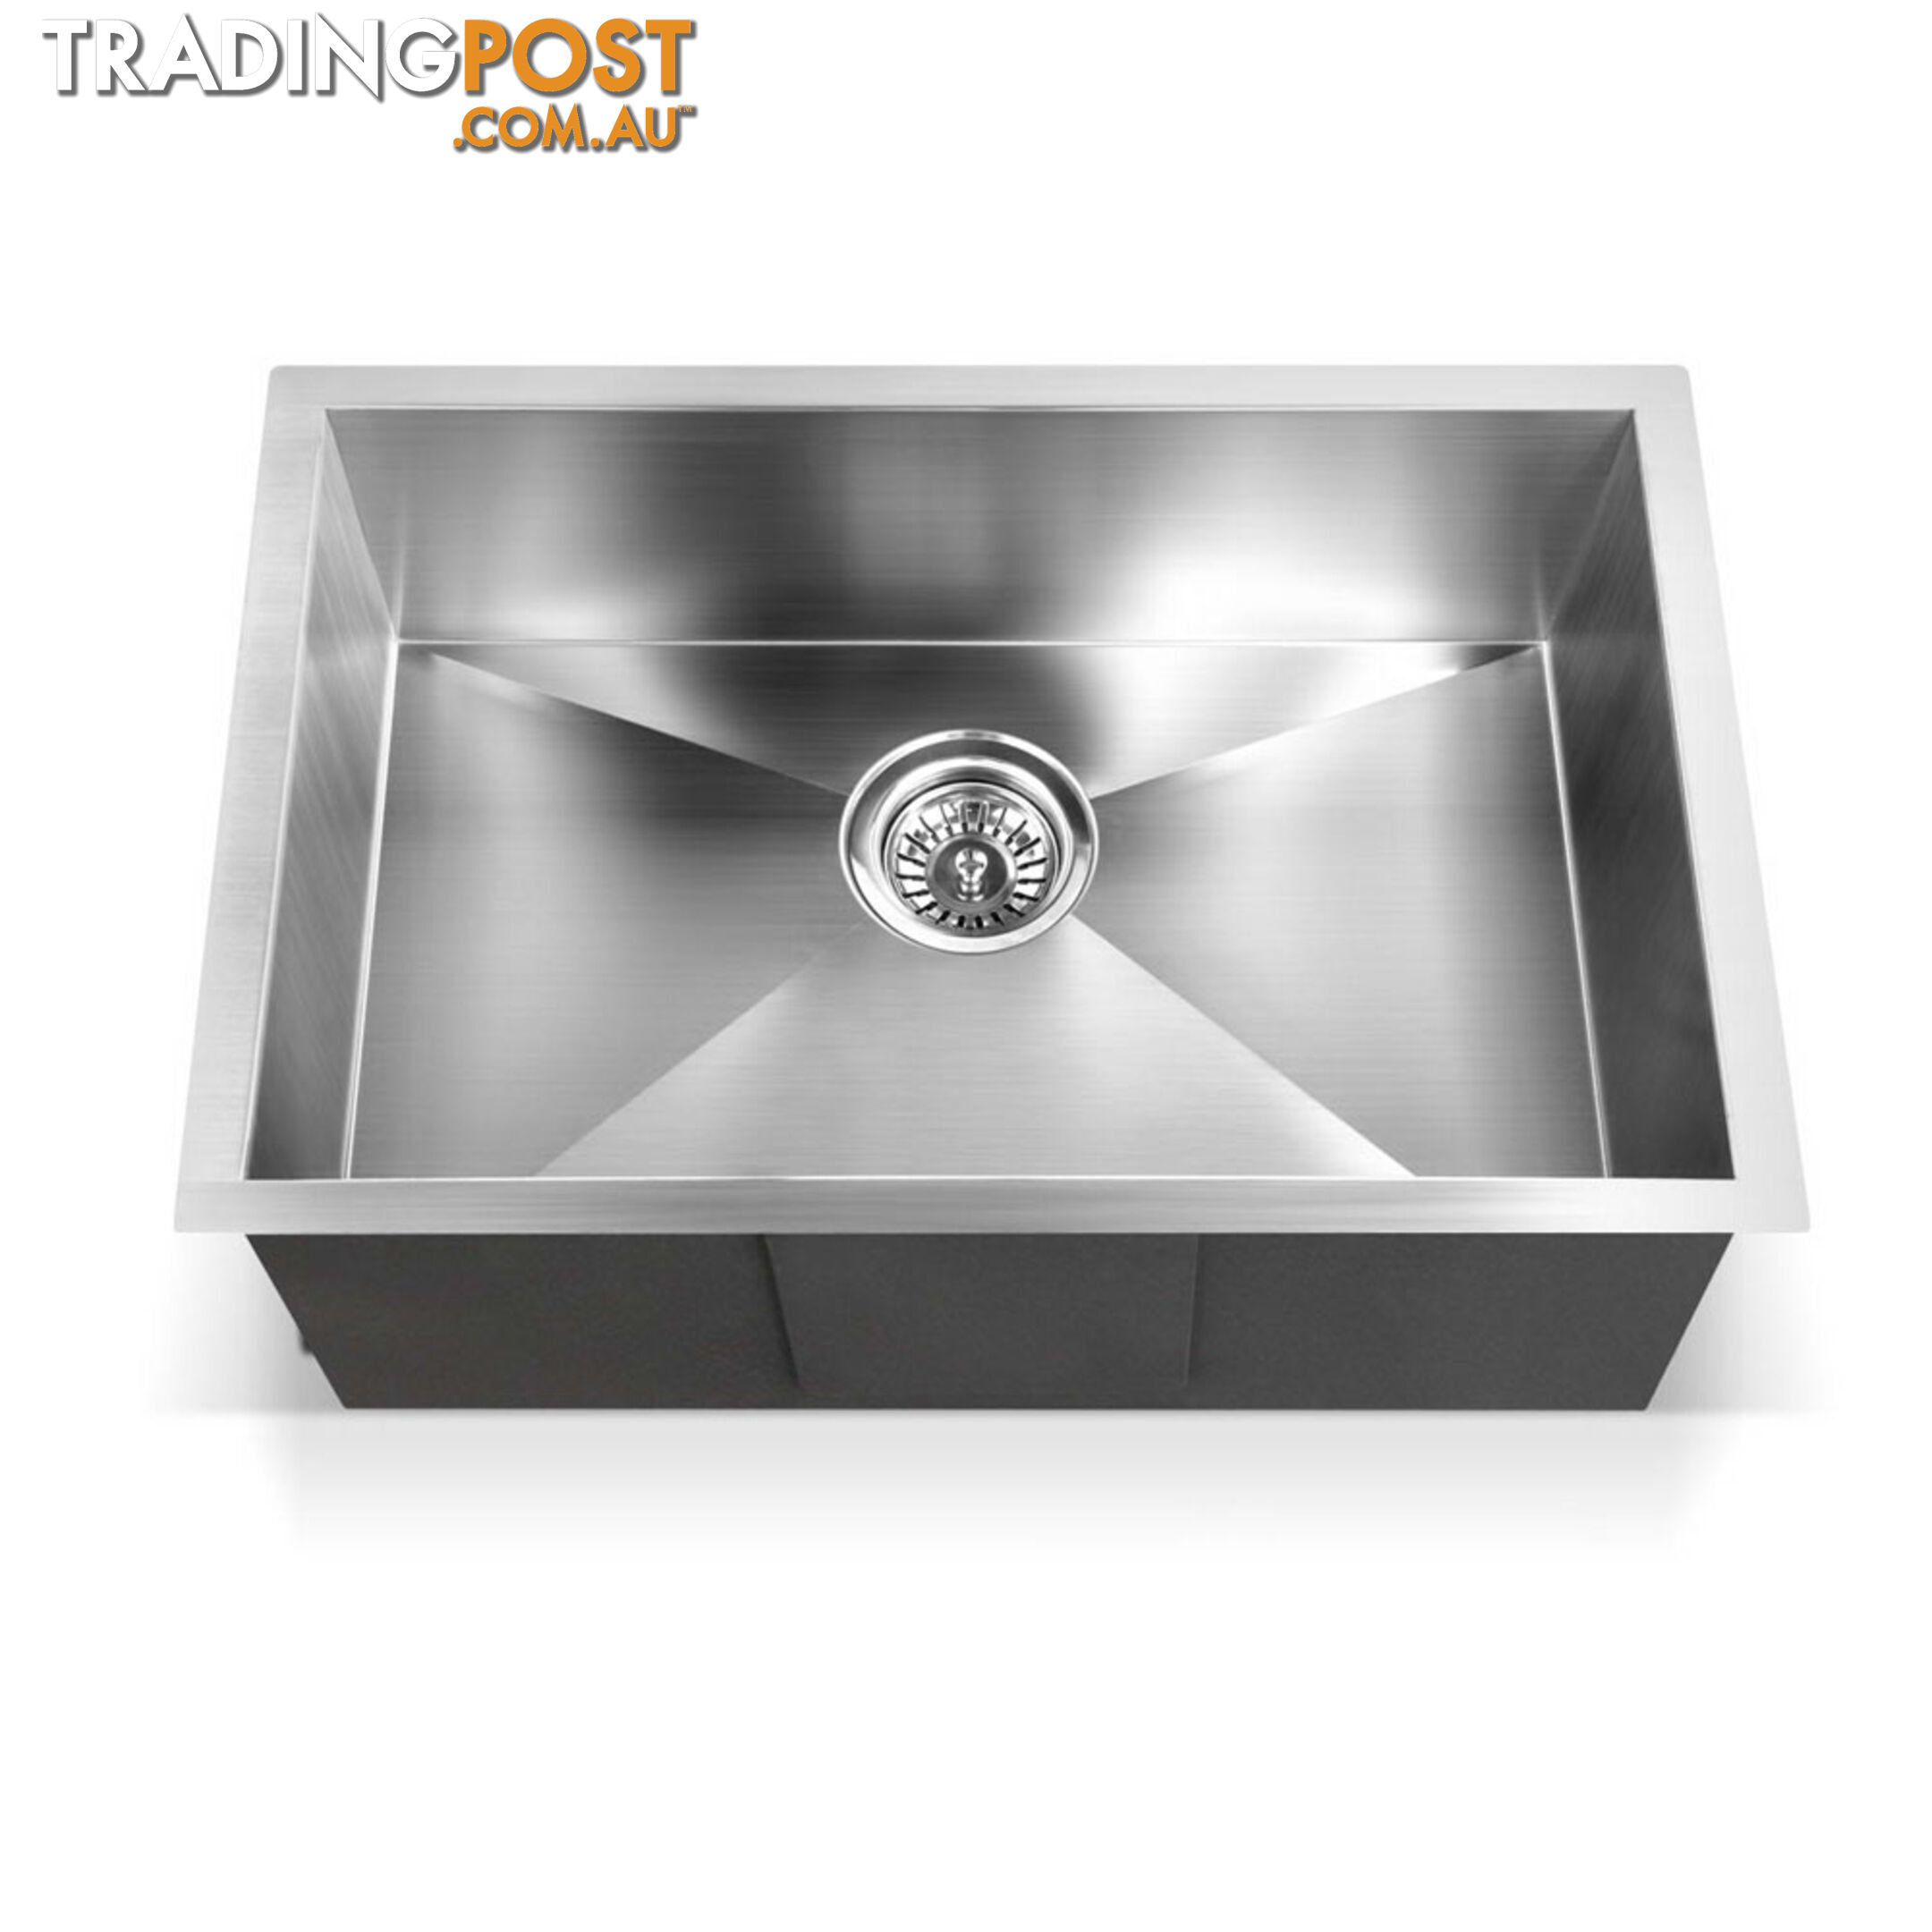 Stainless Steel Kitchen/Laundry Sink with Waste Strainer 600 x 450 mm